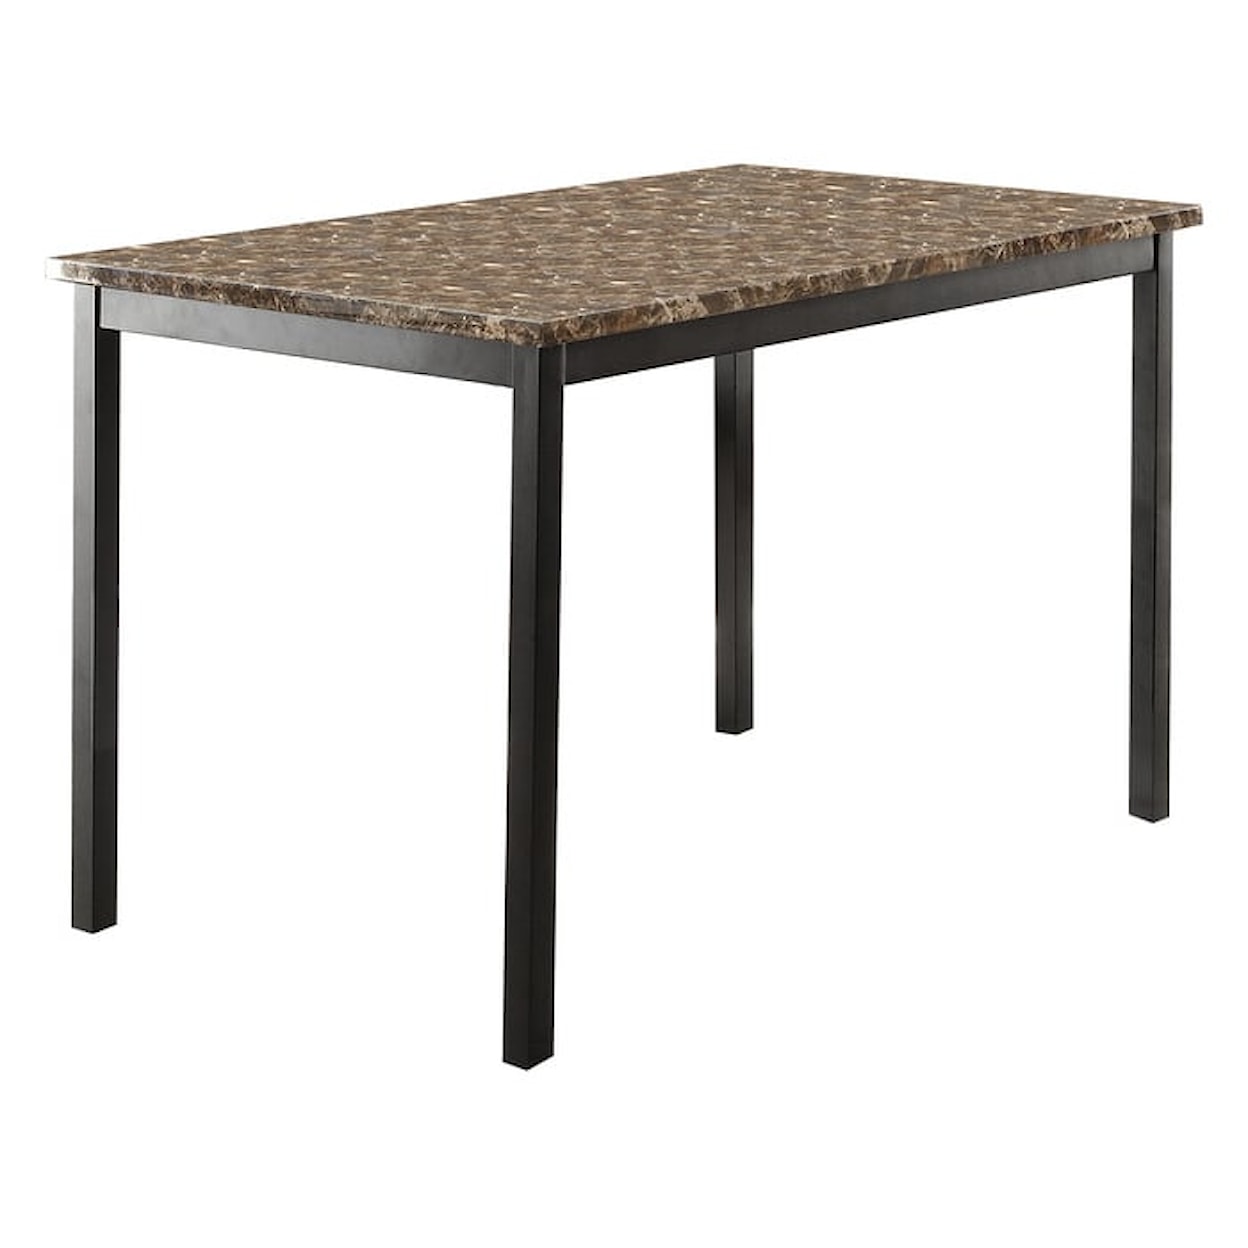 Homelegance Flannery Dining Table